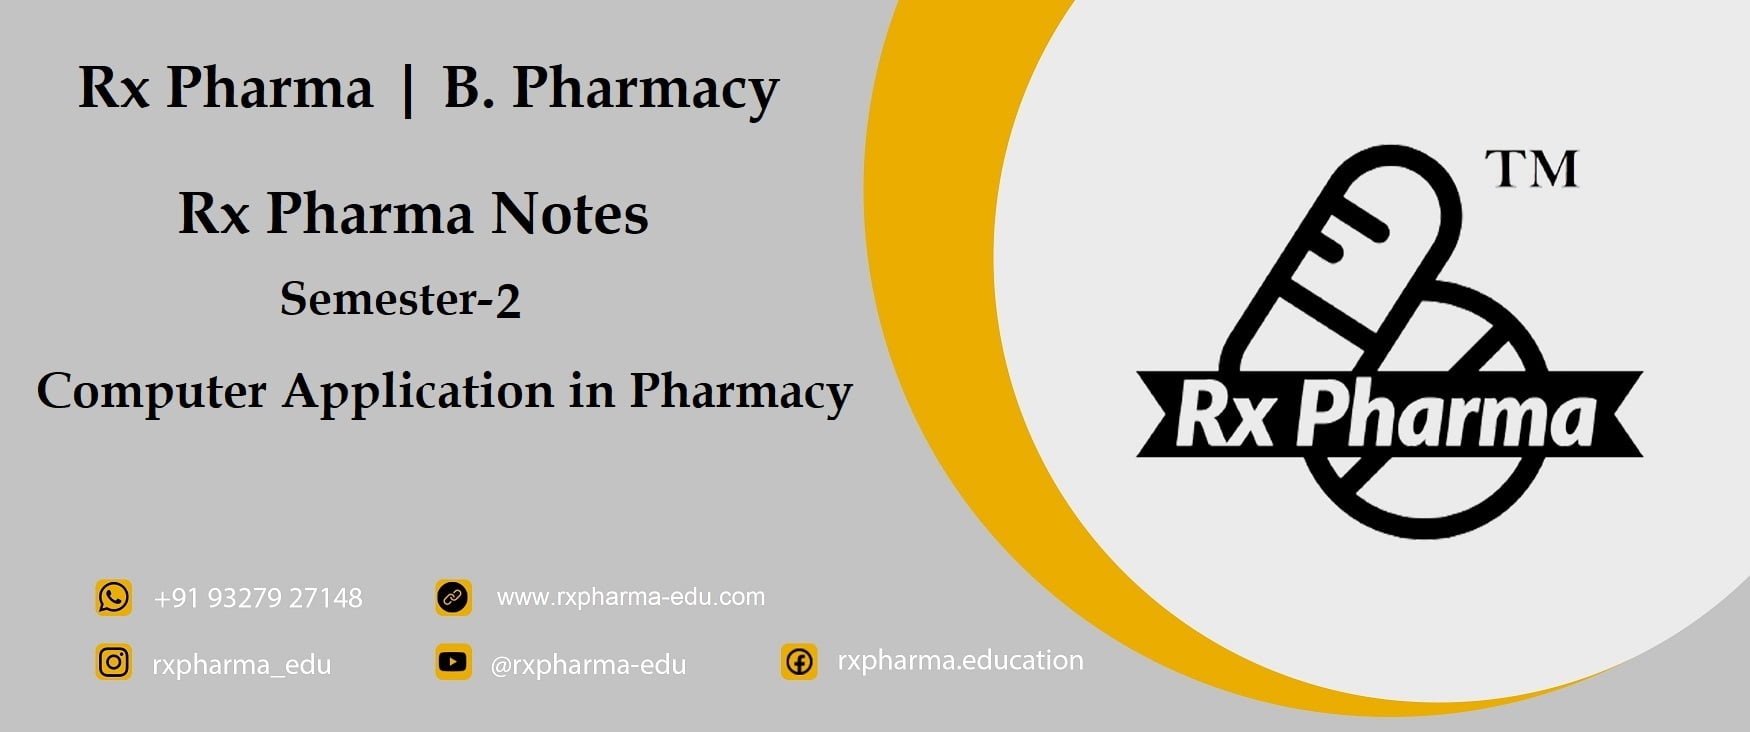 Computer Application in Pharmacy Notes Banner